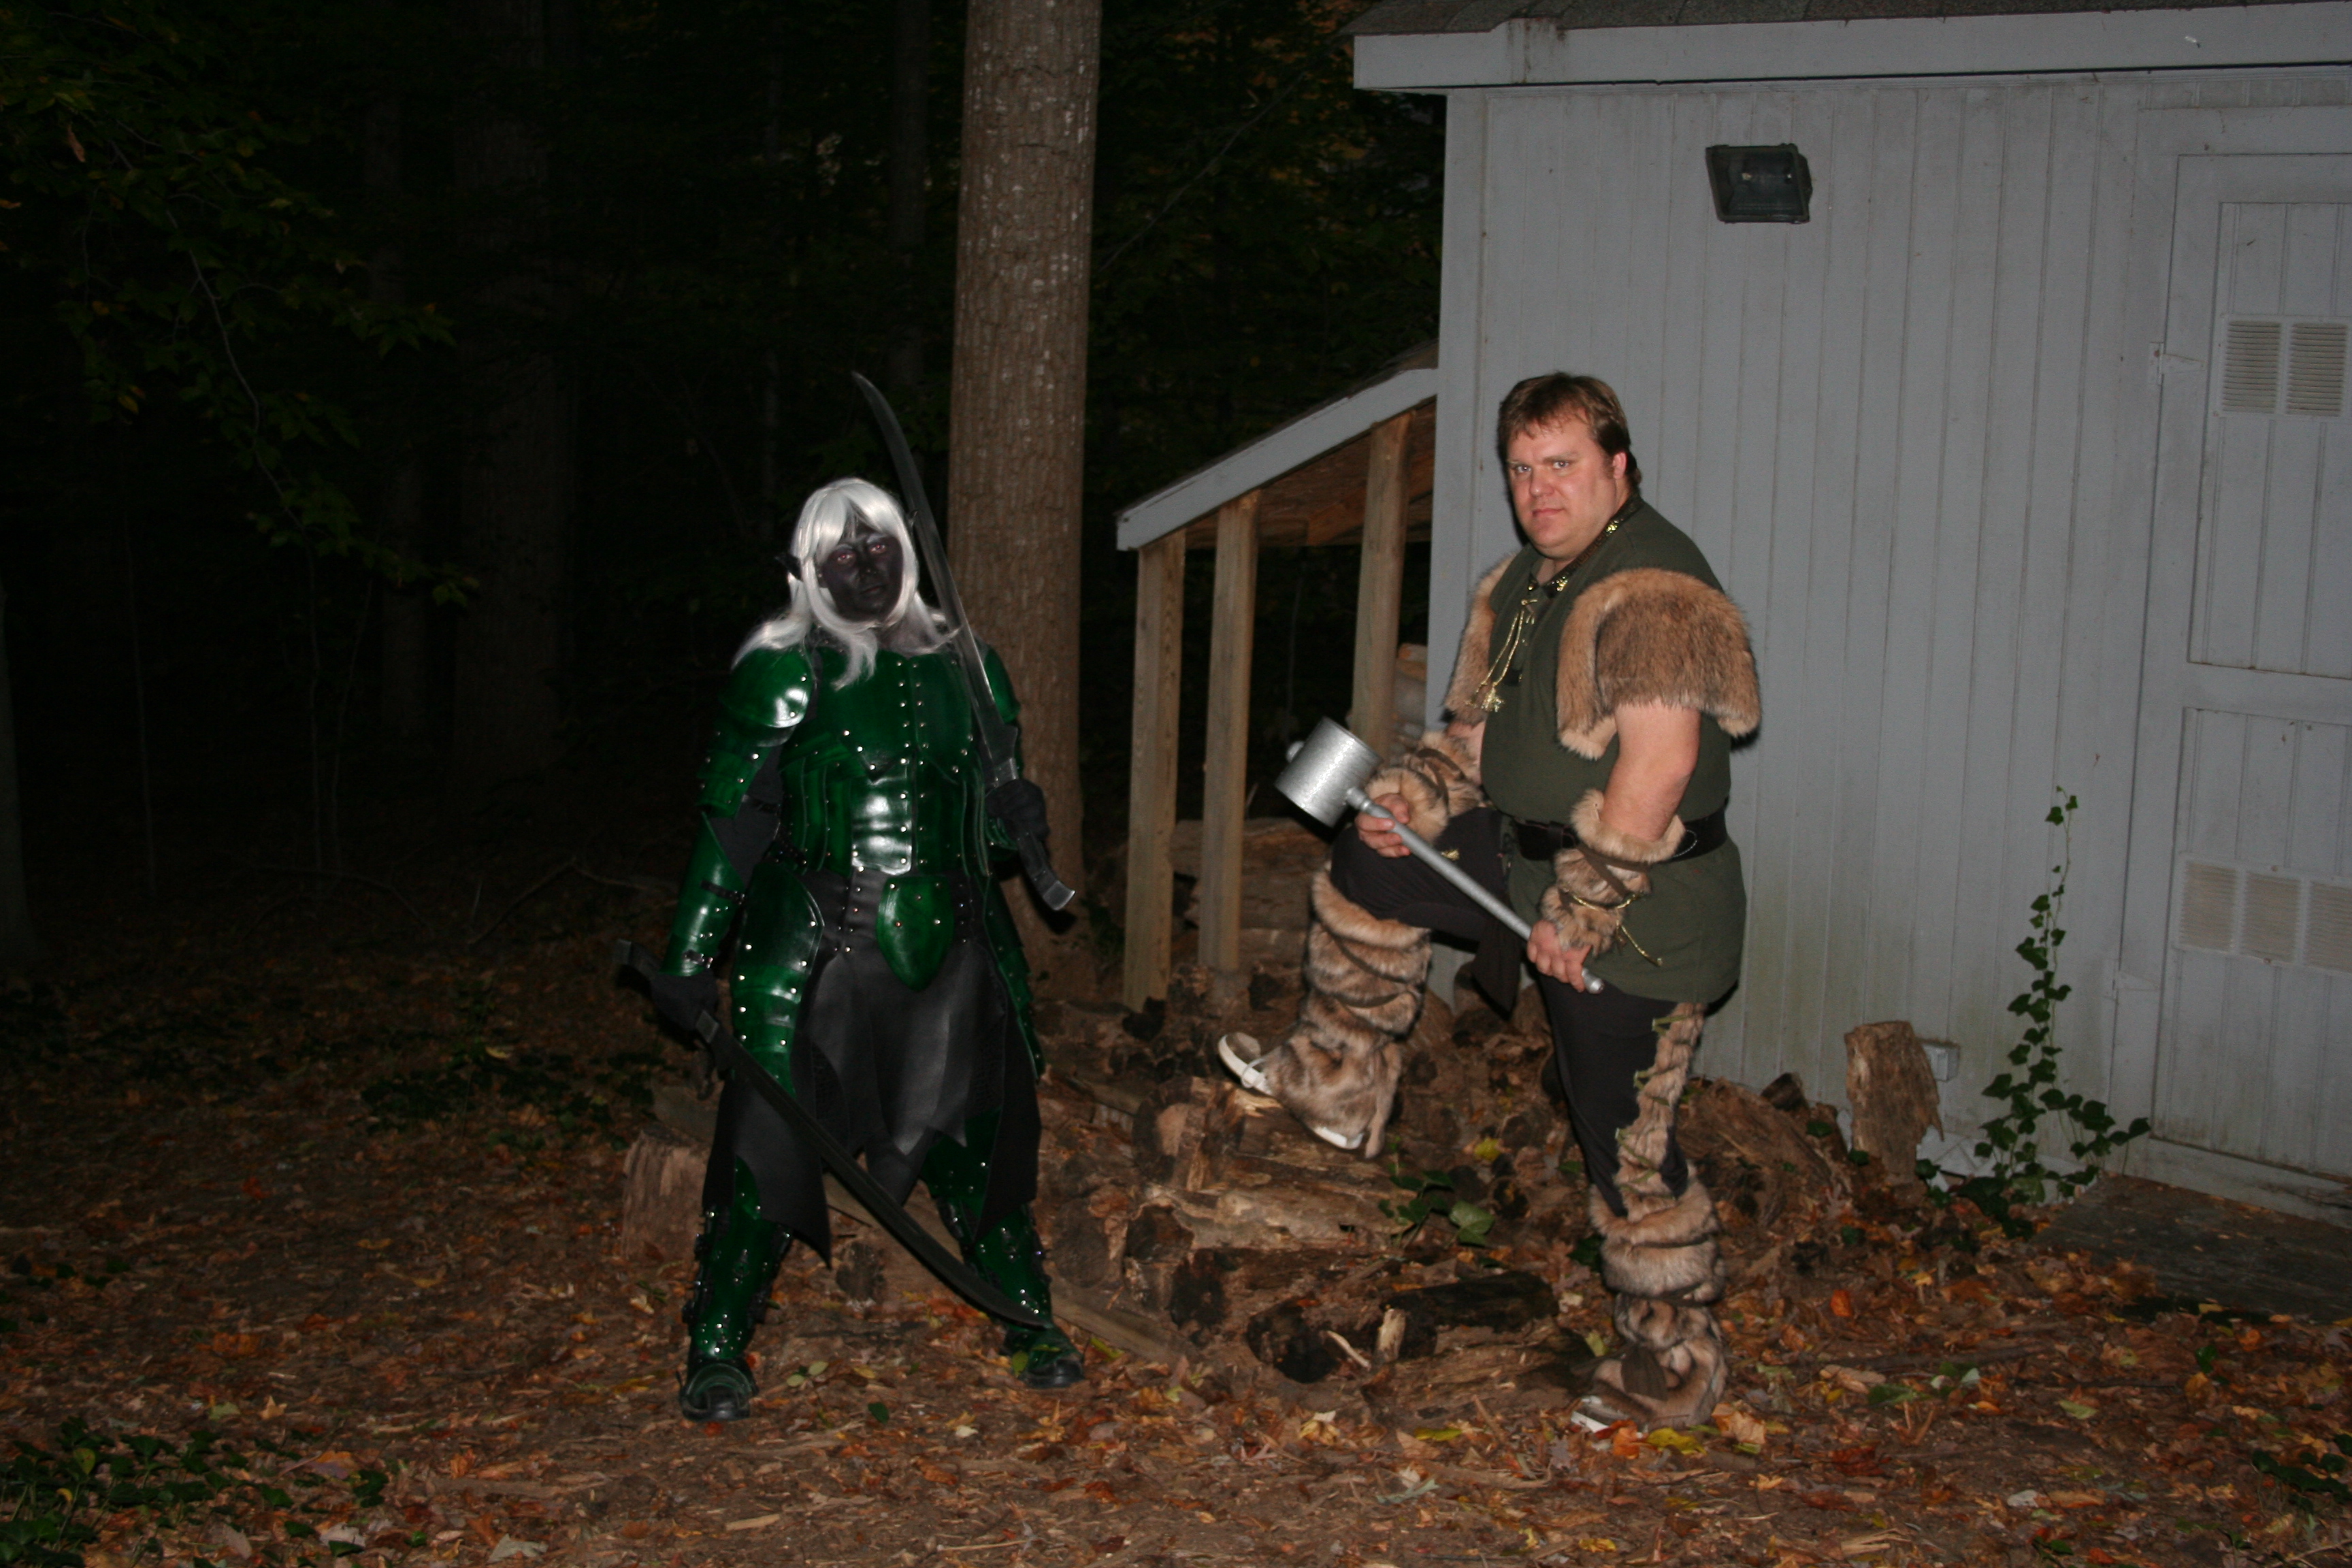 Drizzt And Wulfgar By Ladytwinkle